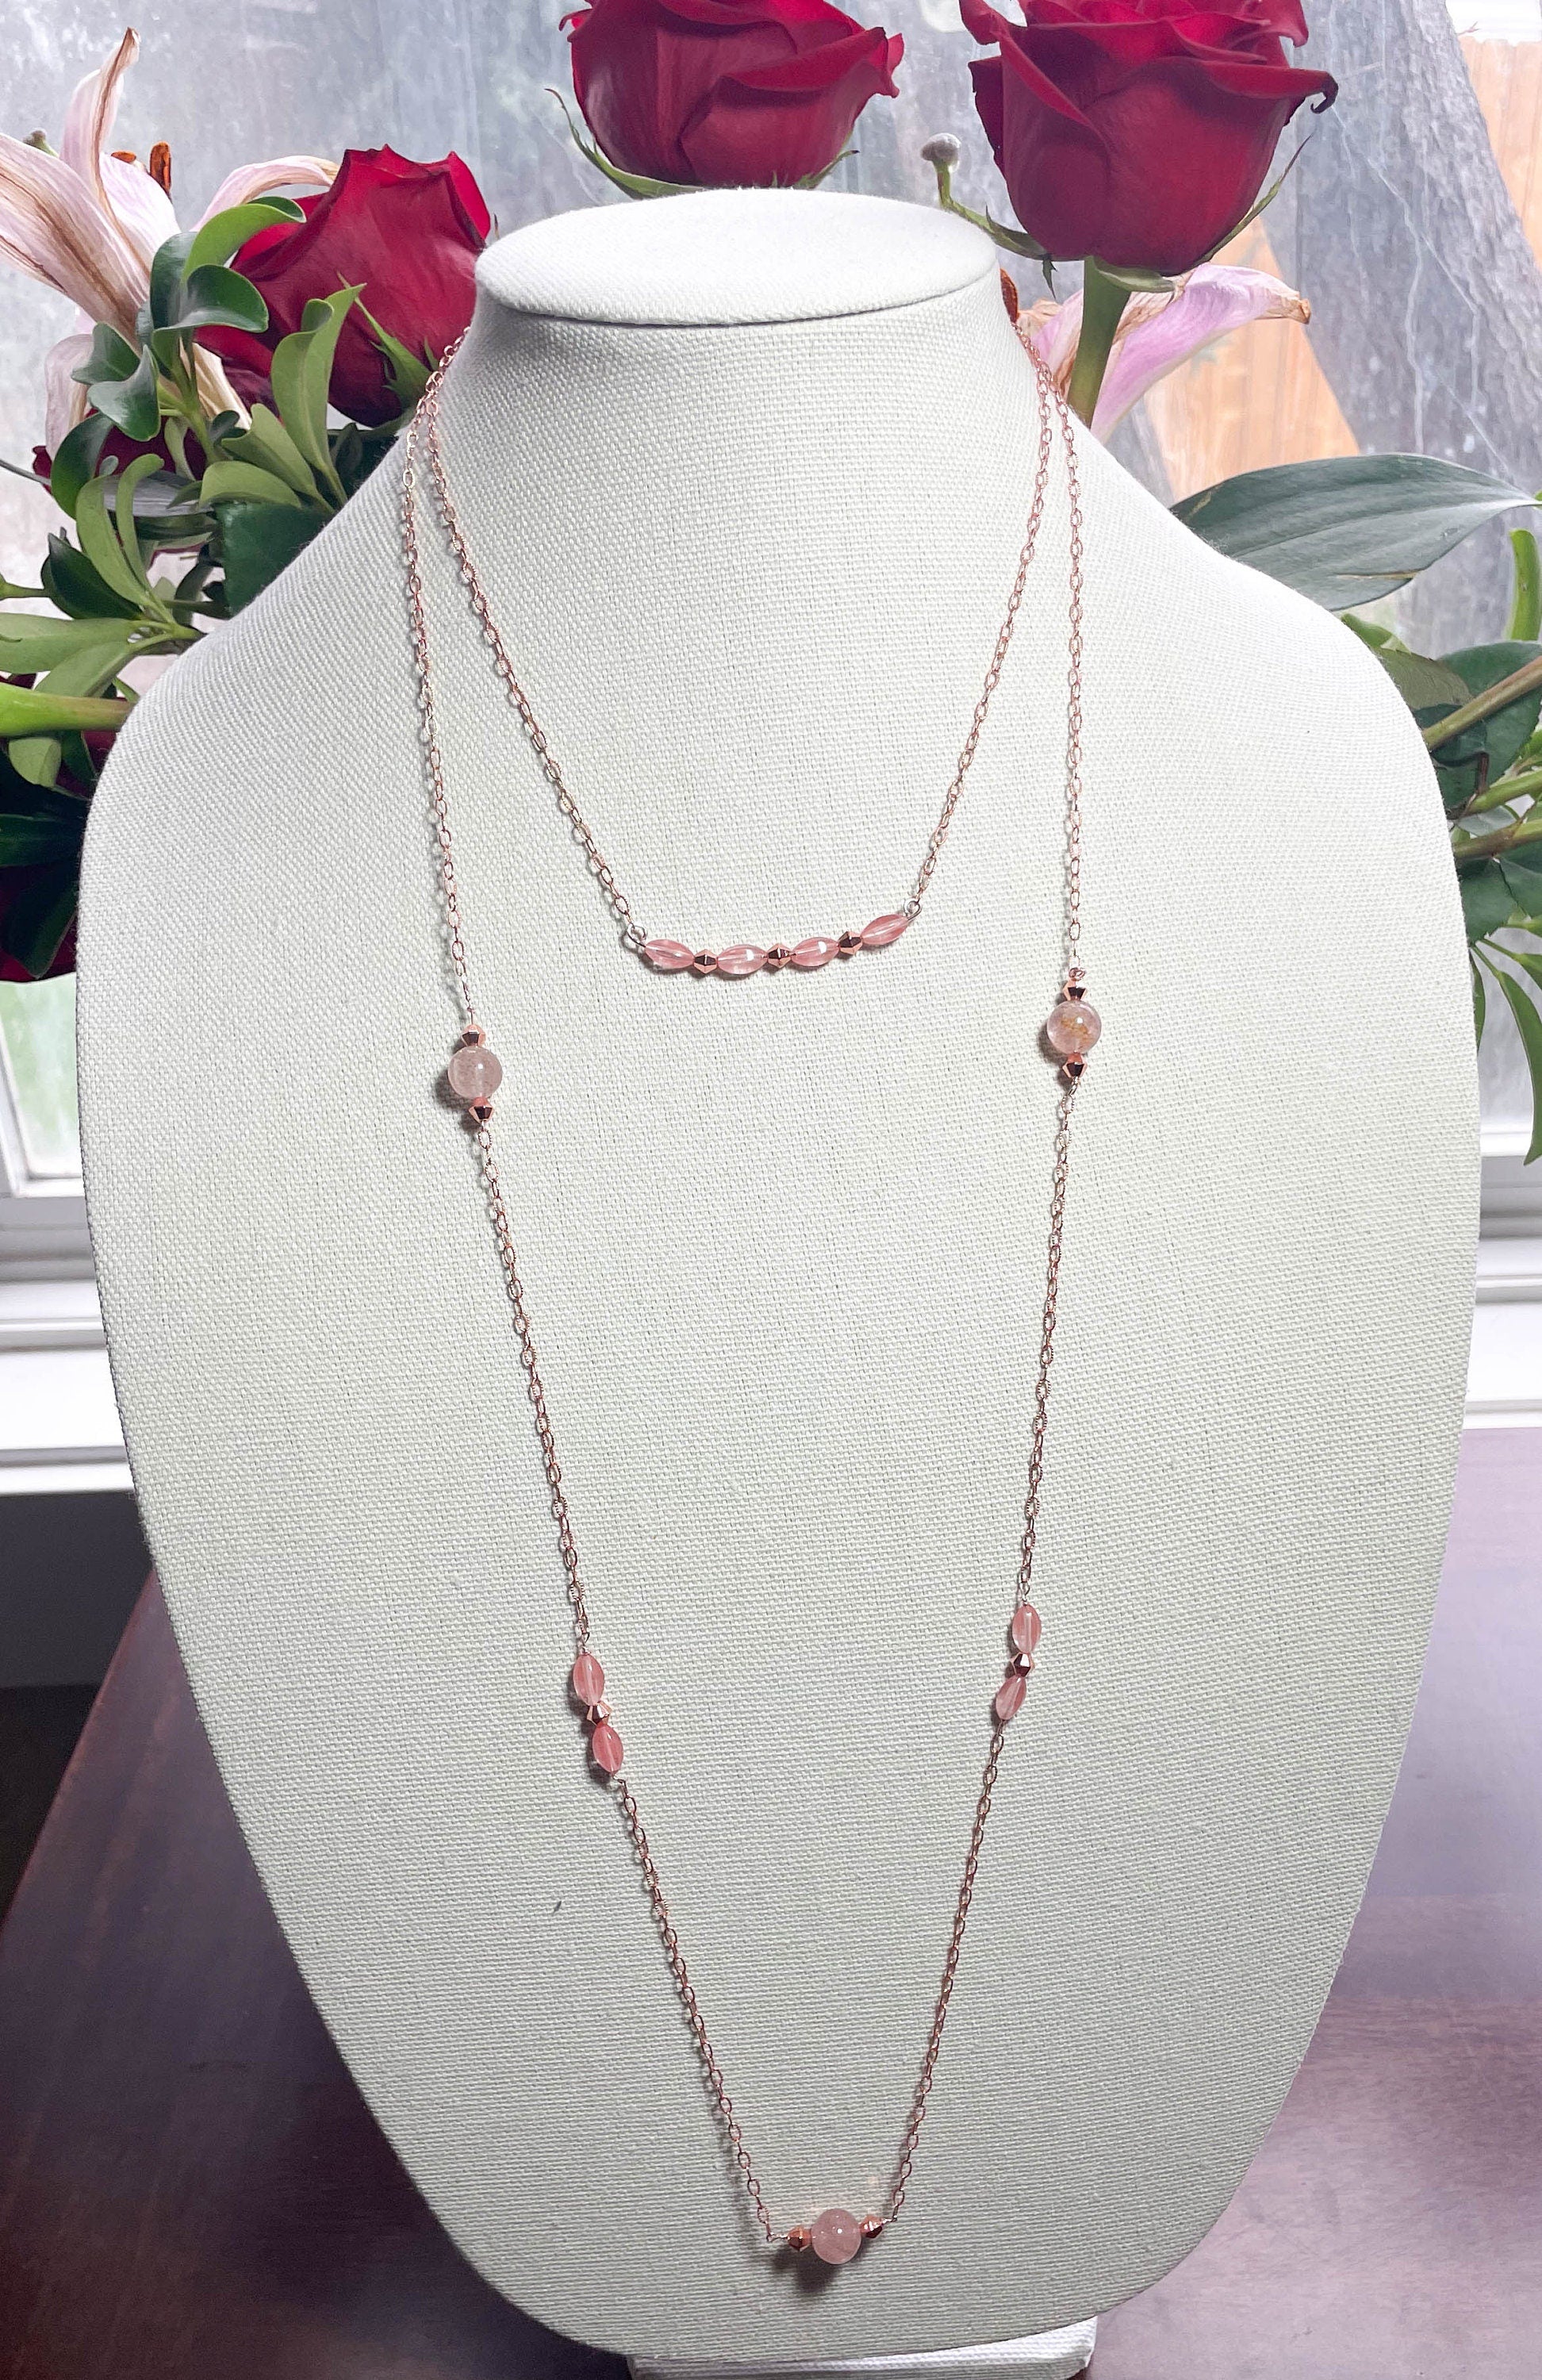 Rose gold and strawberry glass necklace